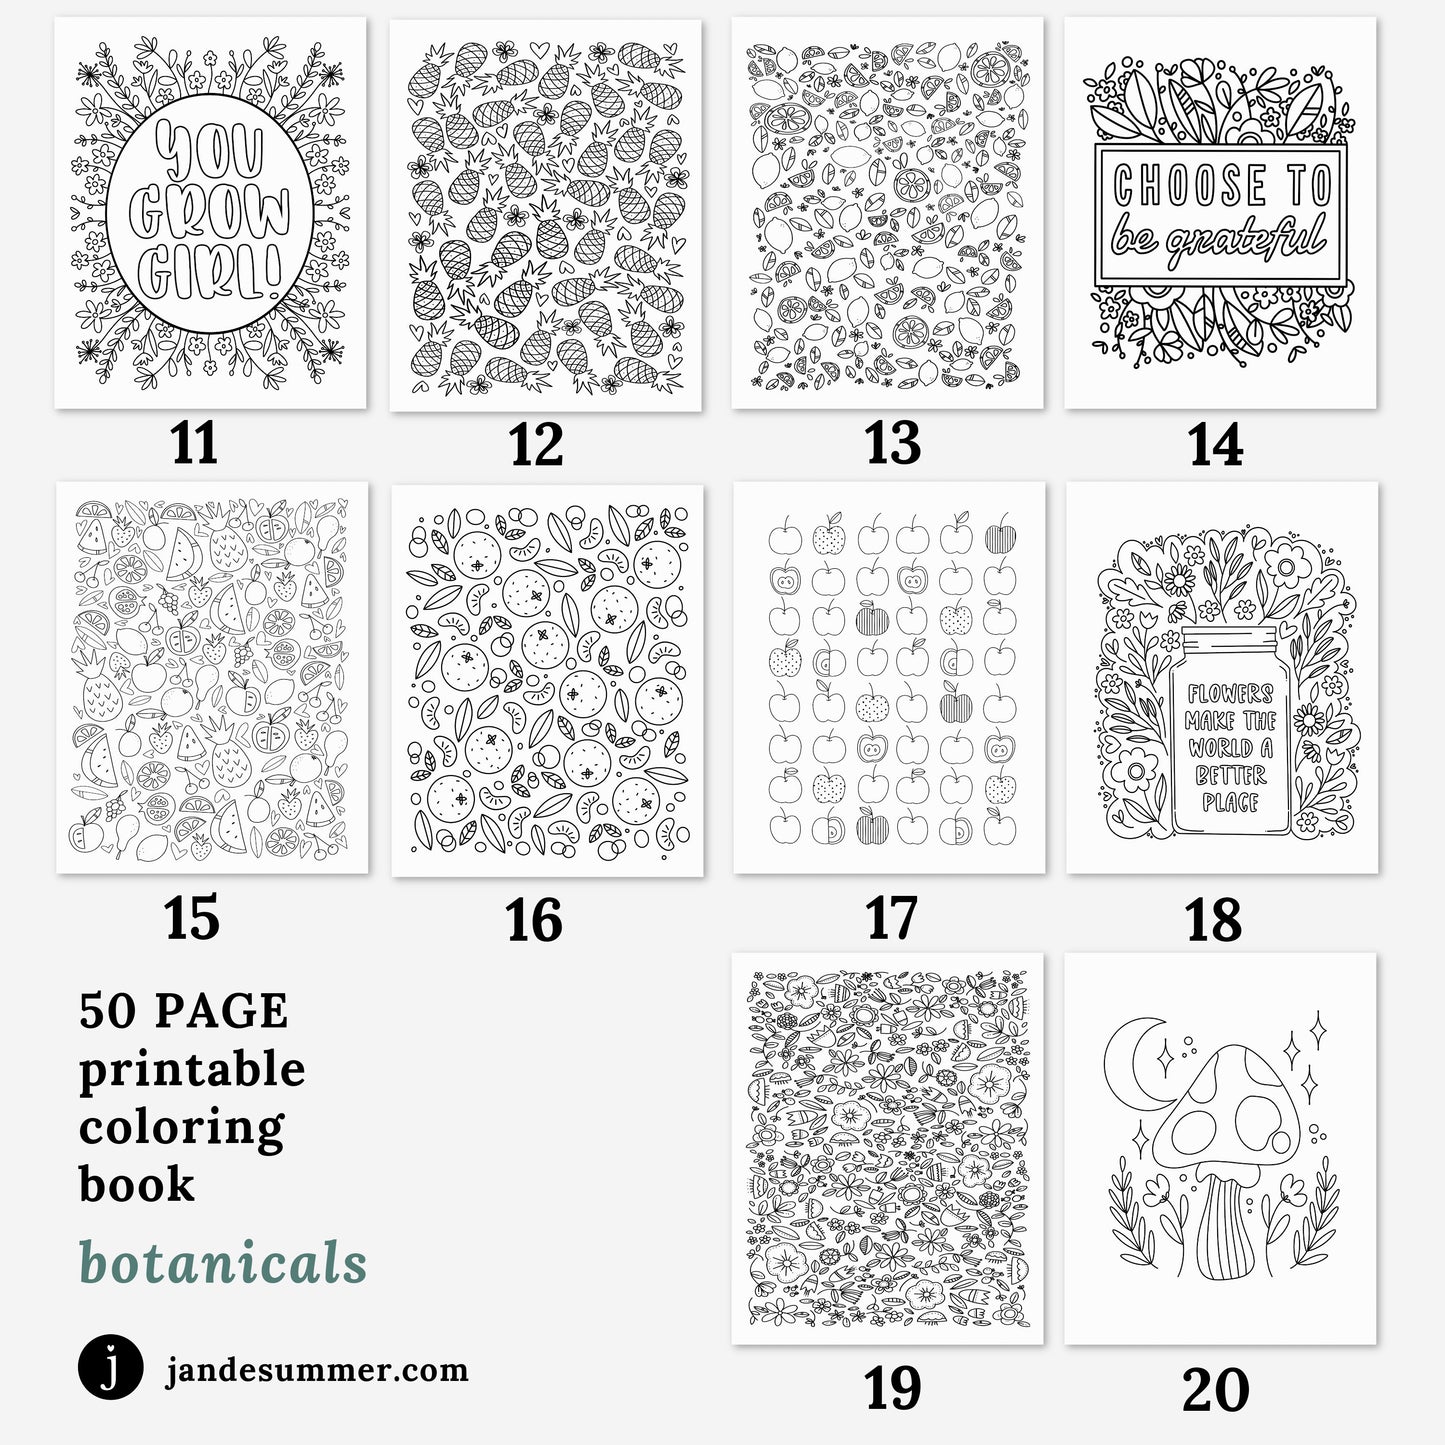 50 Coloring Pages | Botanical Digital Coloring Book Floral Illustrations | Zen Printable Coloring Pages